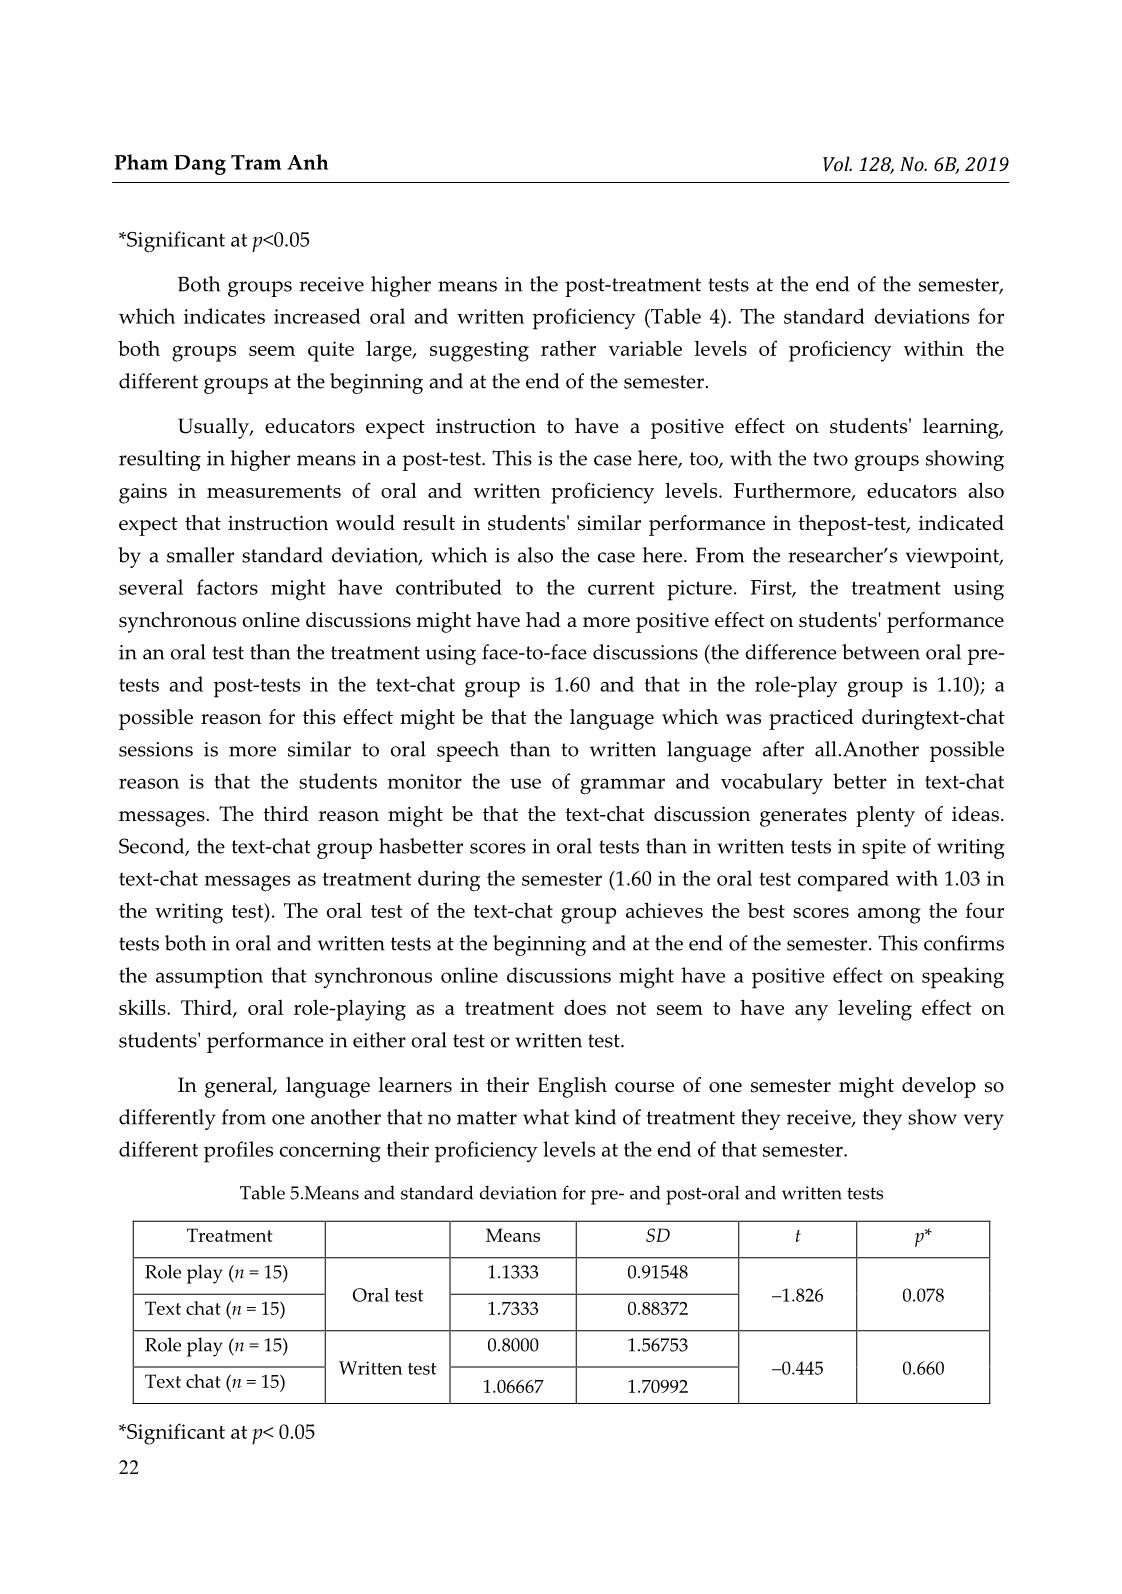 Quantitative analysis of the effect of synchronous online discussions on oral and written language development for efl university students in Vietnam trang 7